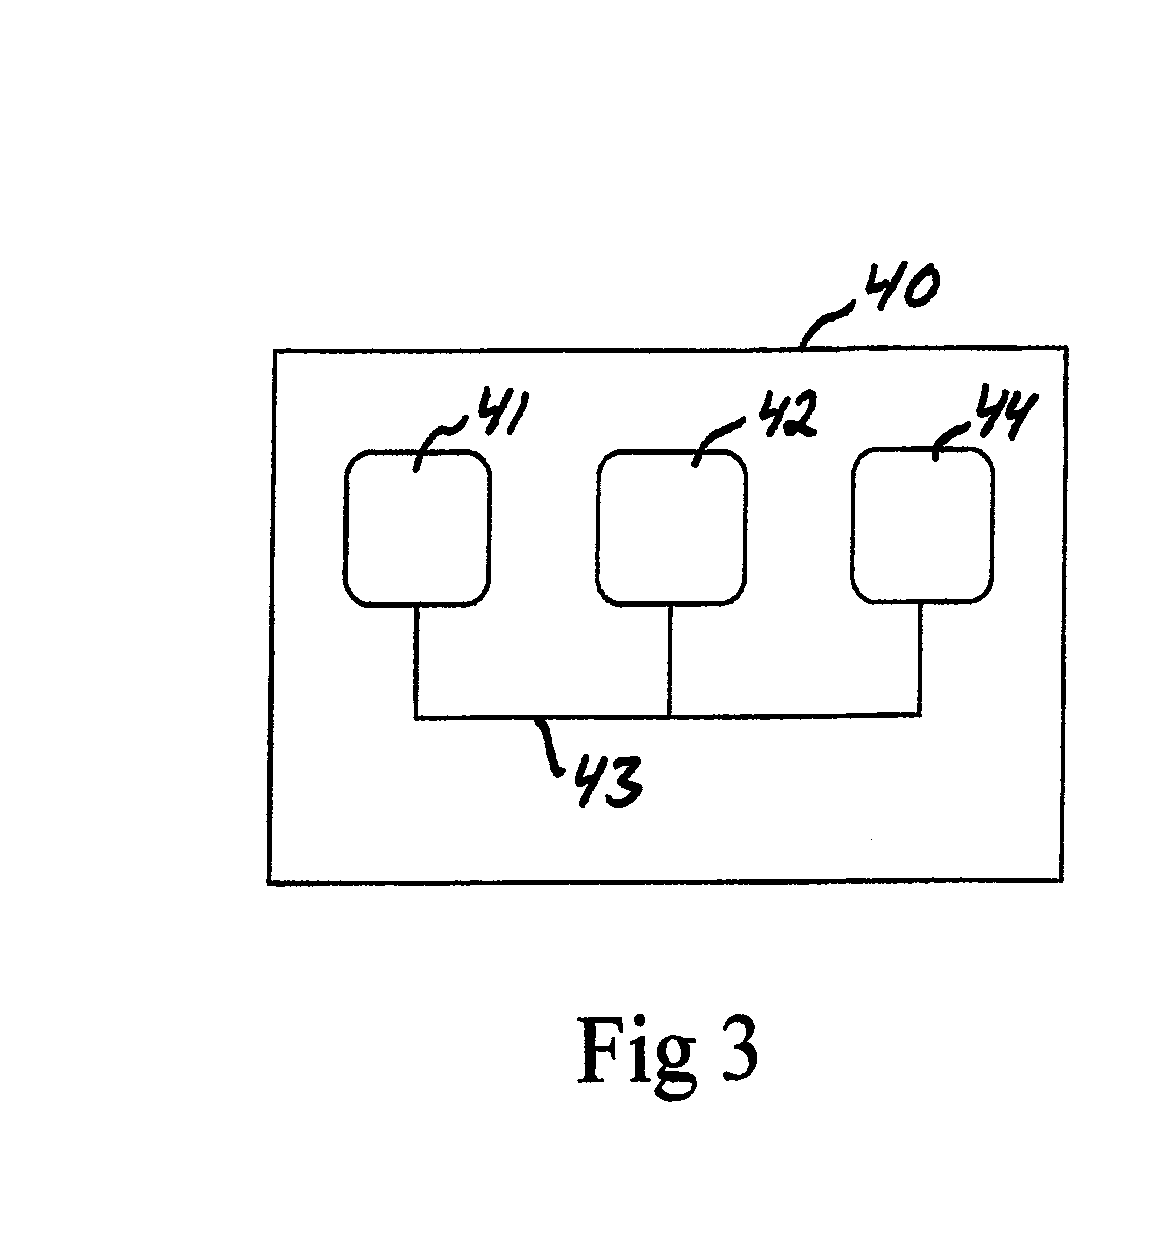 Method for gearchange in a hybrid vehicle